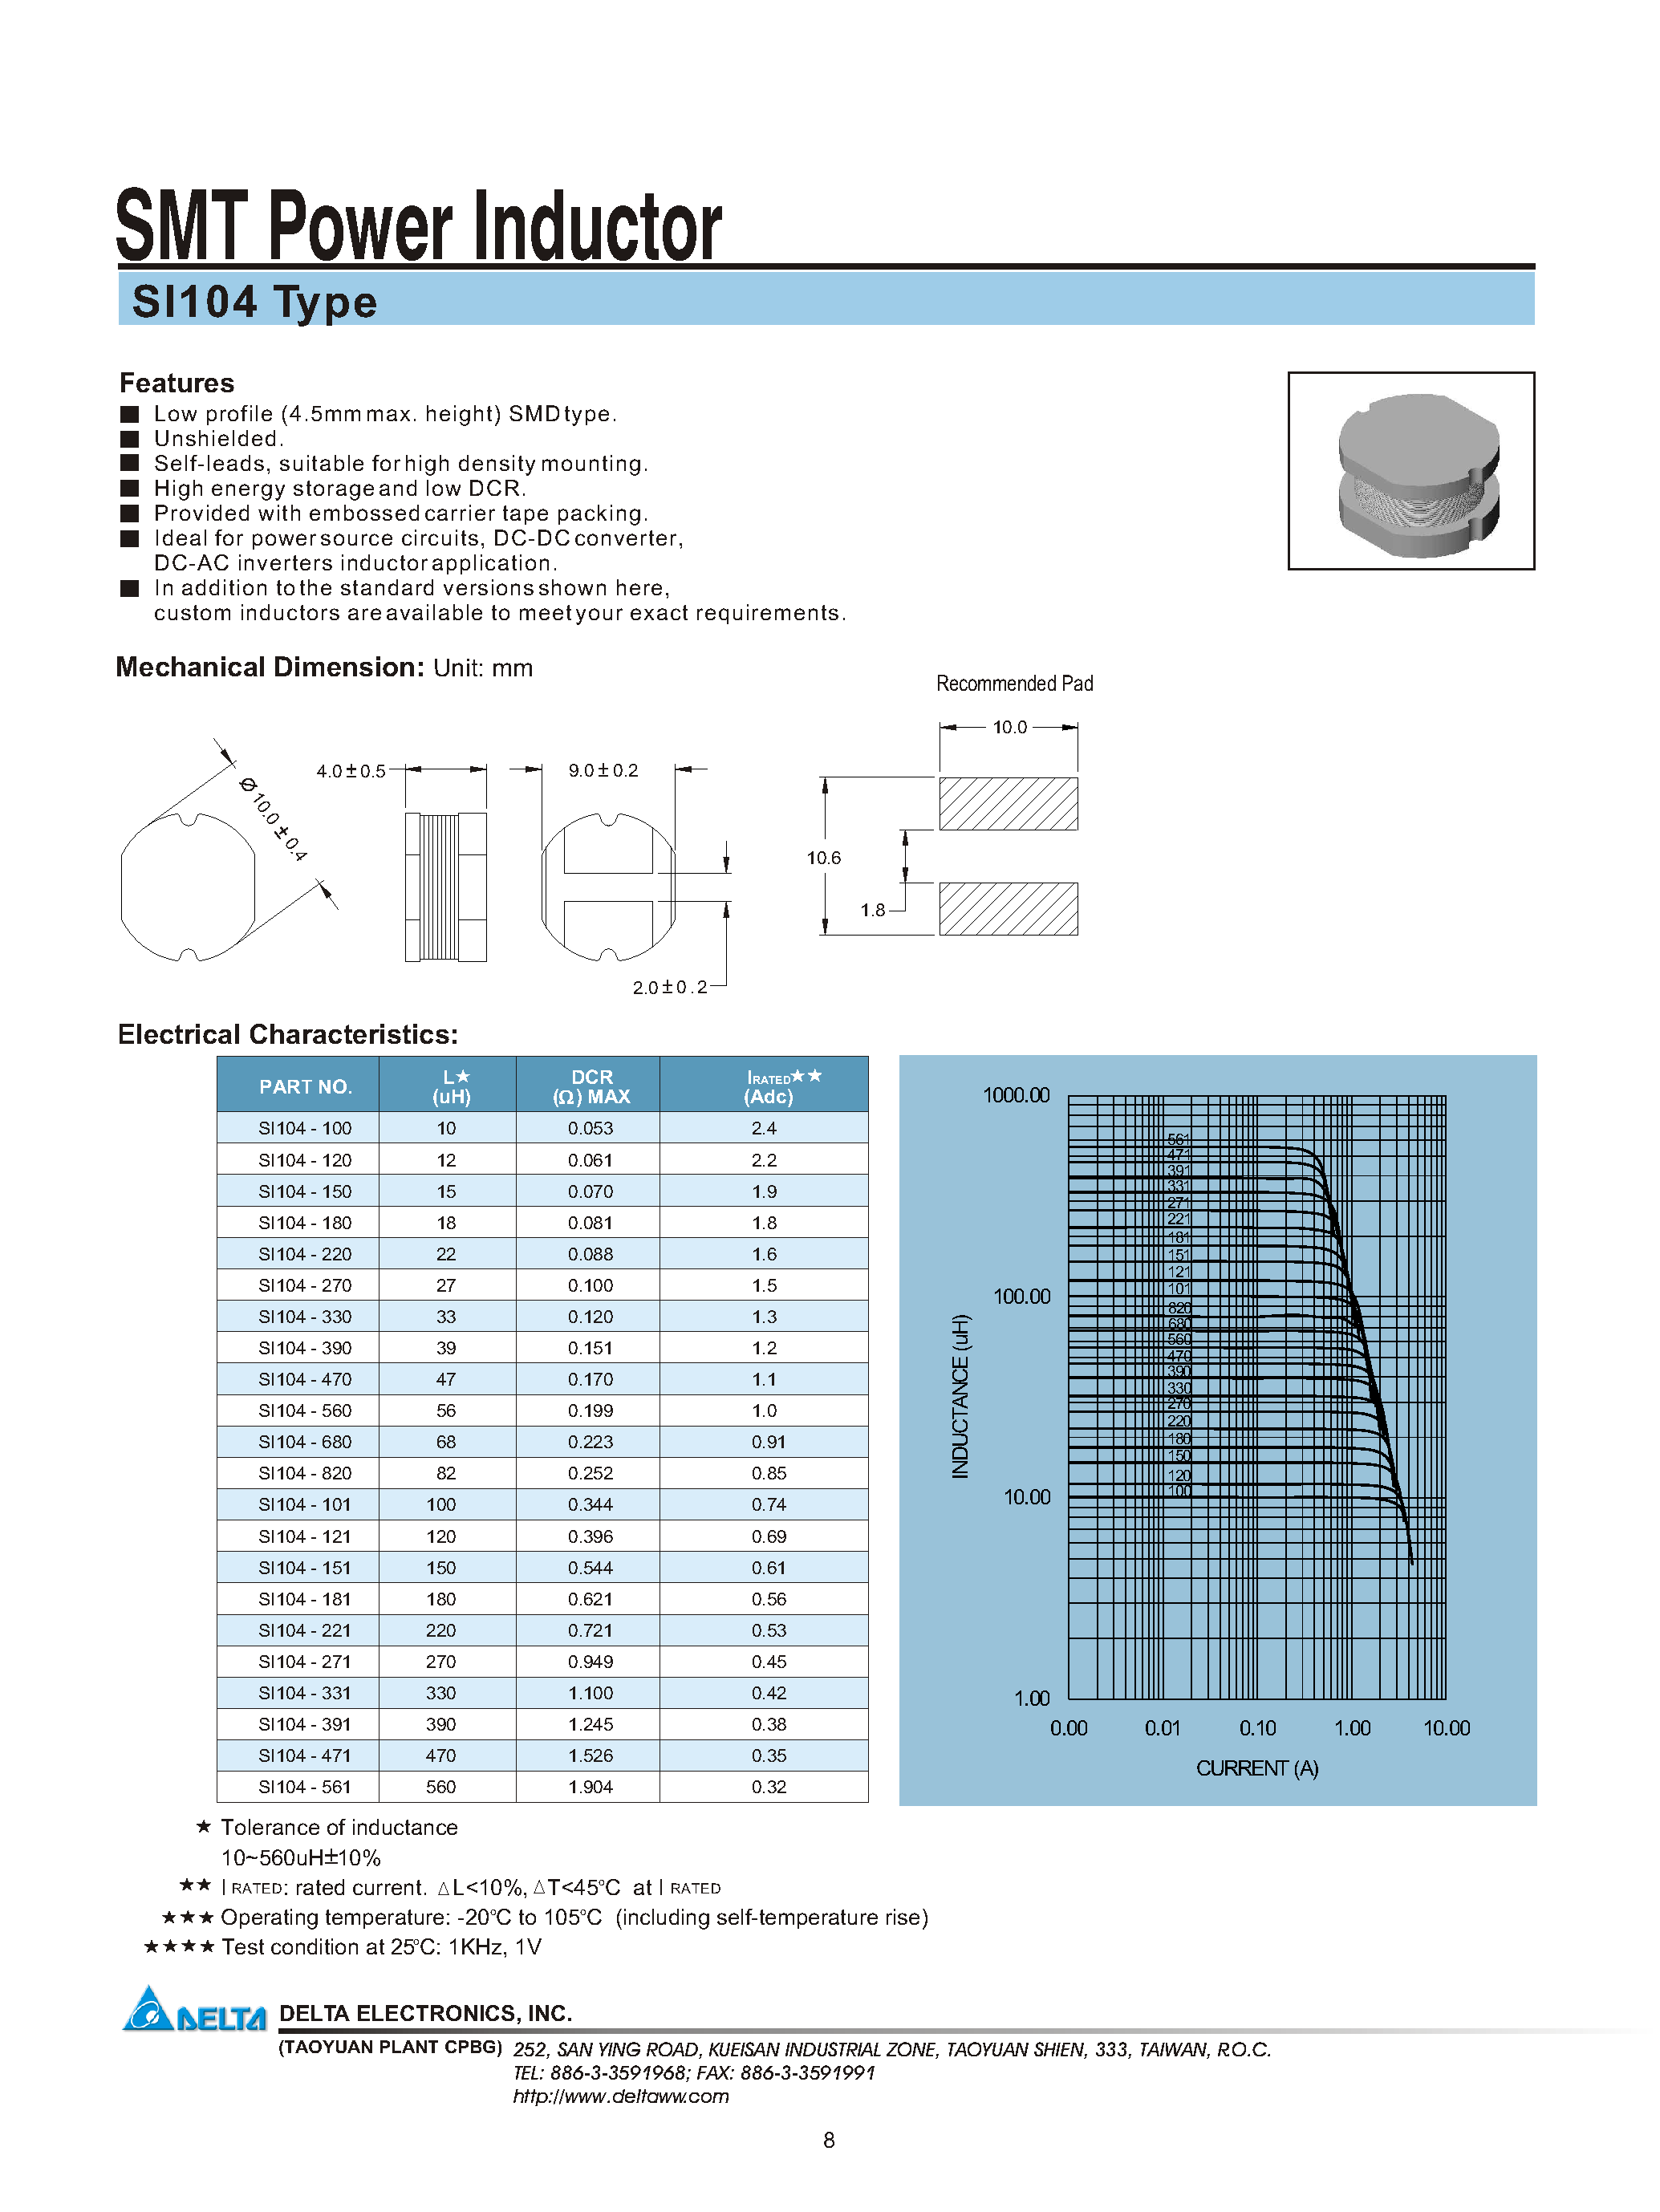 Datasheet SI104-330 - SMT Power Inductor page 1